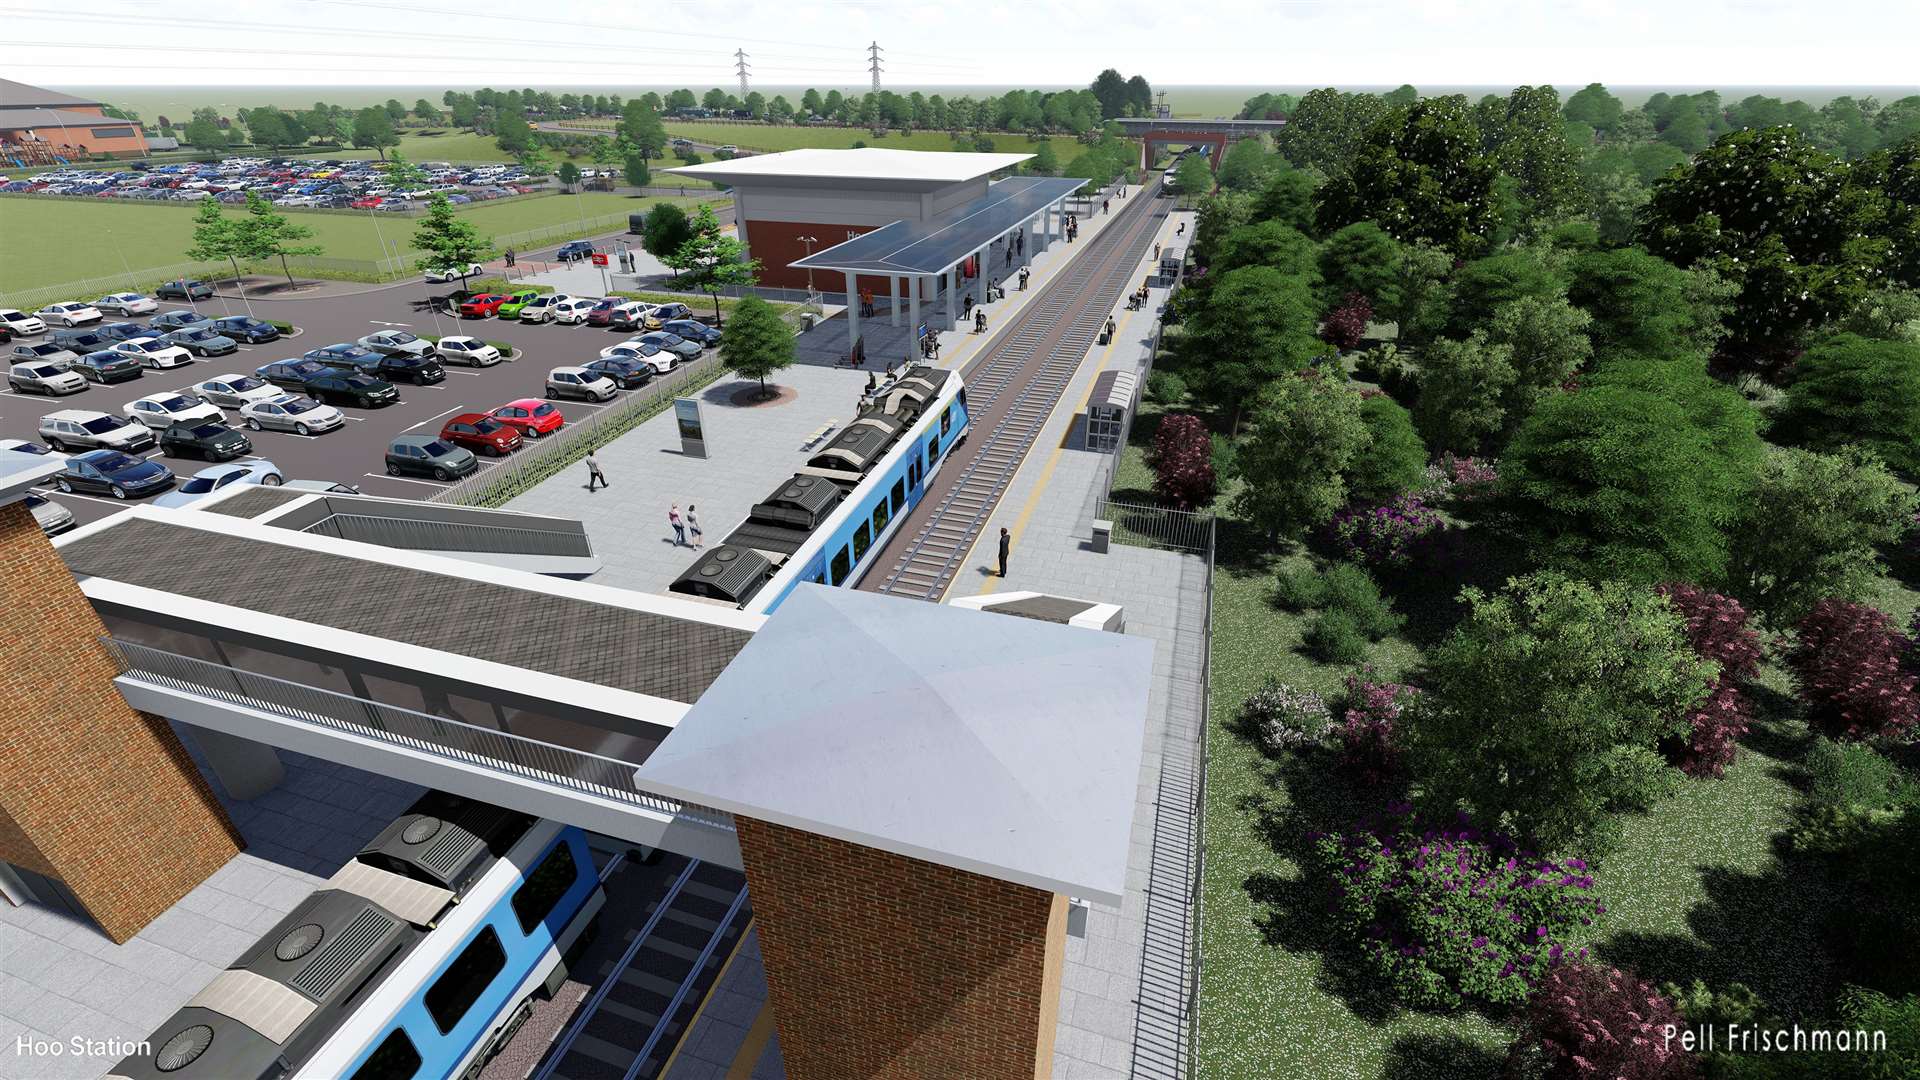 The Hoo Peninsula is a key area allocated for development in Medway under the council's Local Plan document which is facing fierce opposition. It includes £170m plans for infrastructure including a new railway station